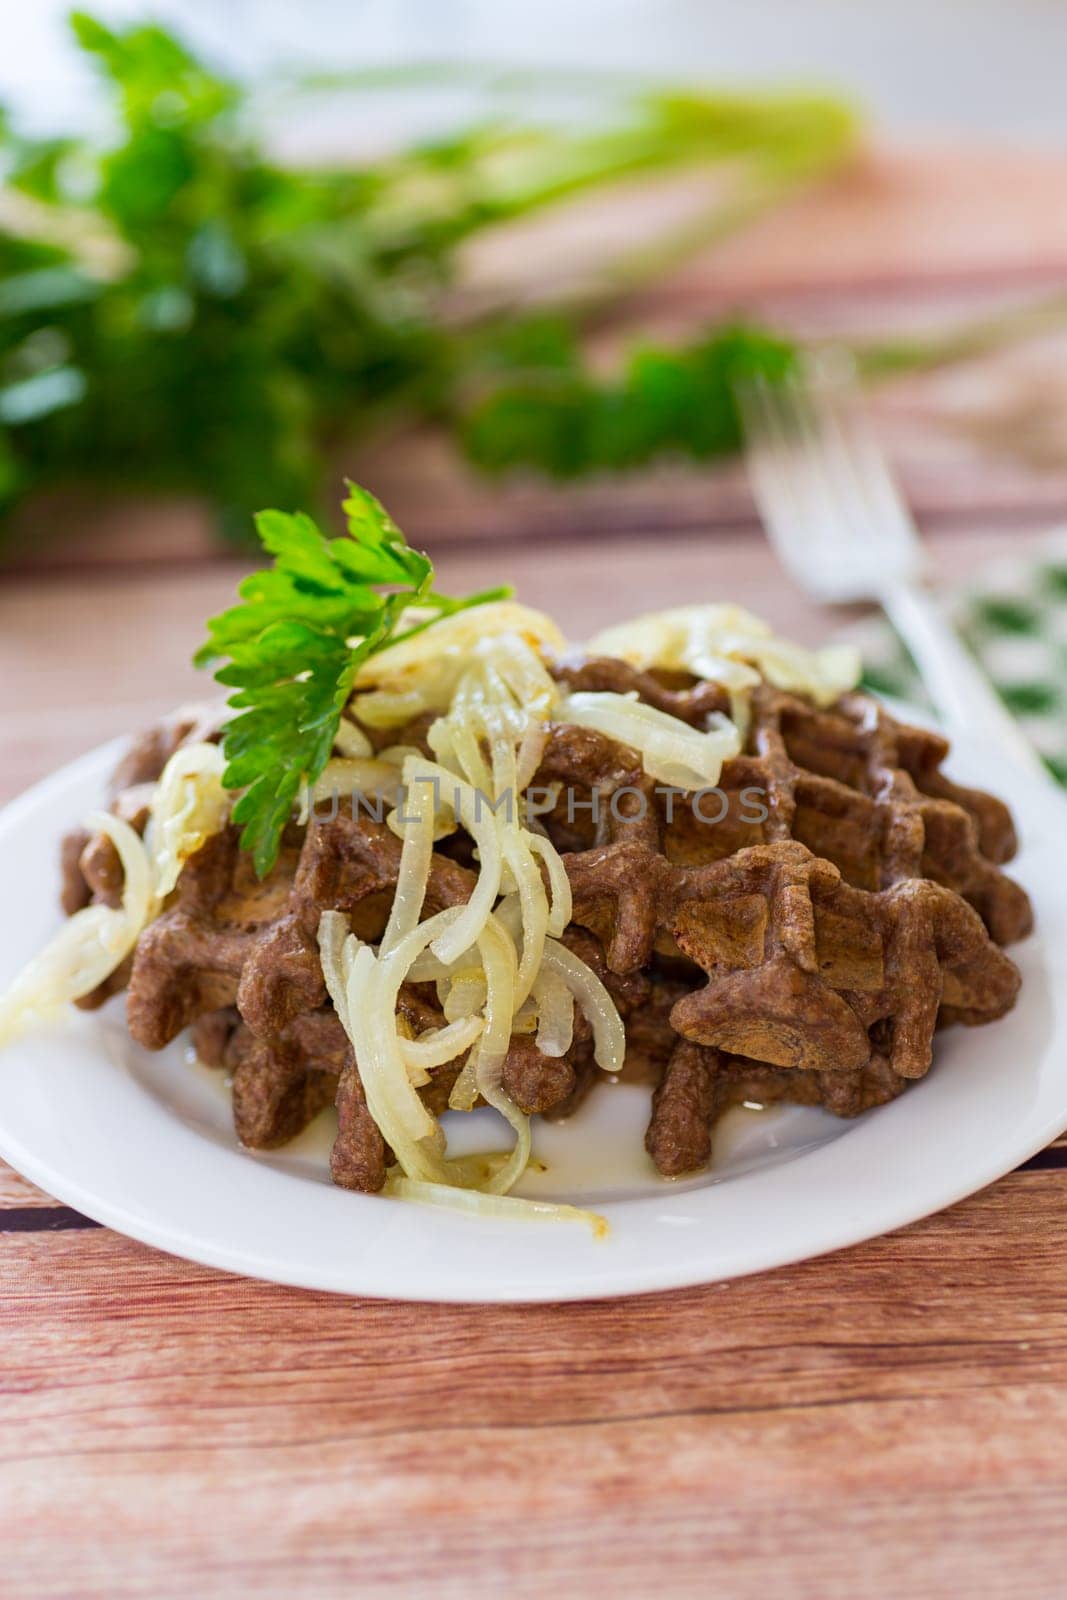 fried liver waffles with onions and herbs by Rawlik